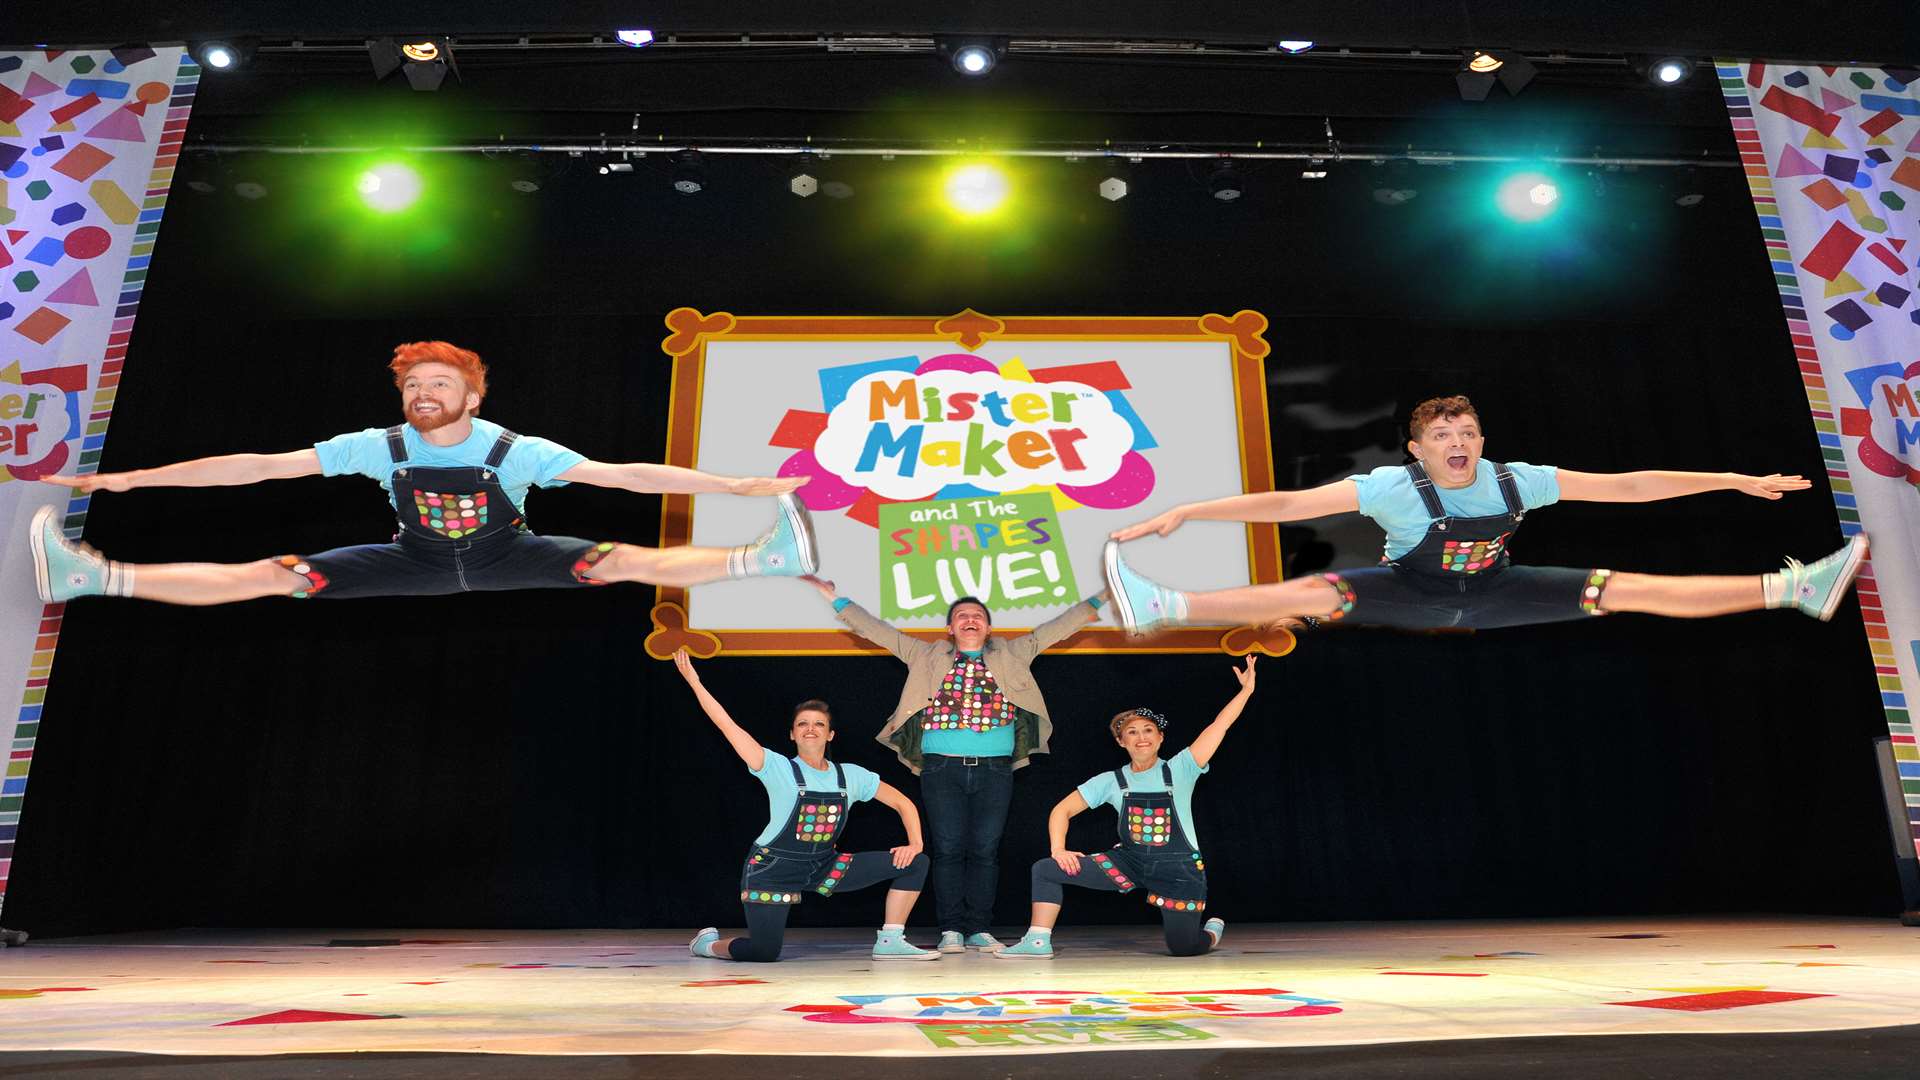 Mister Maker and the Shapes Live will be in Kent